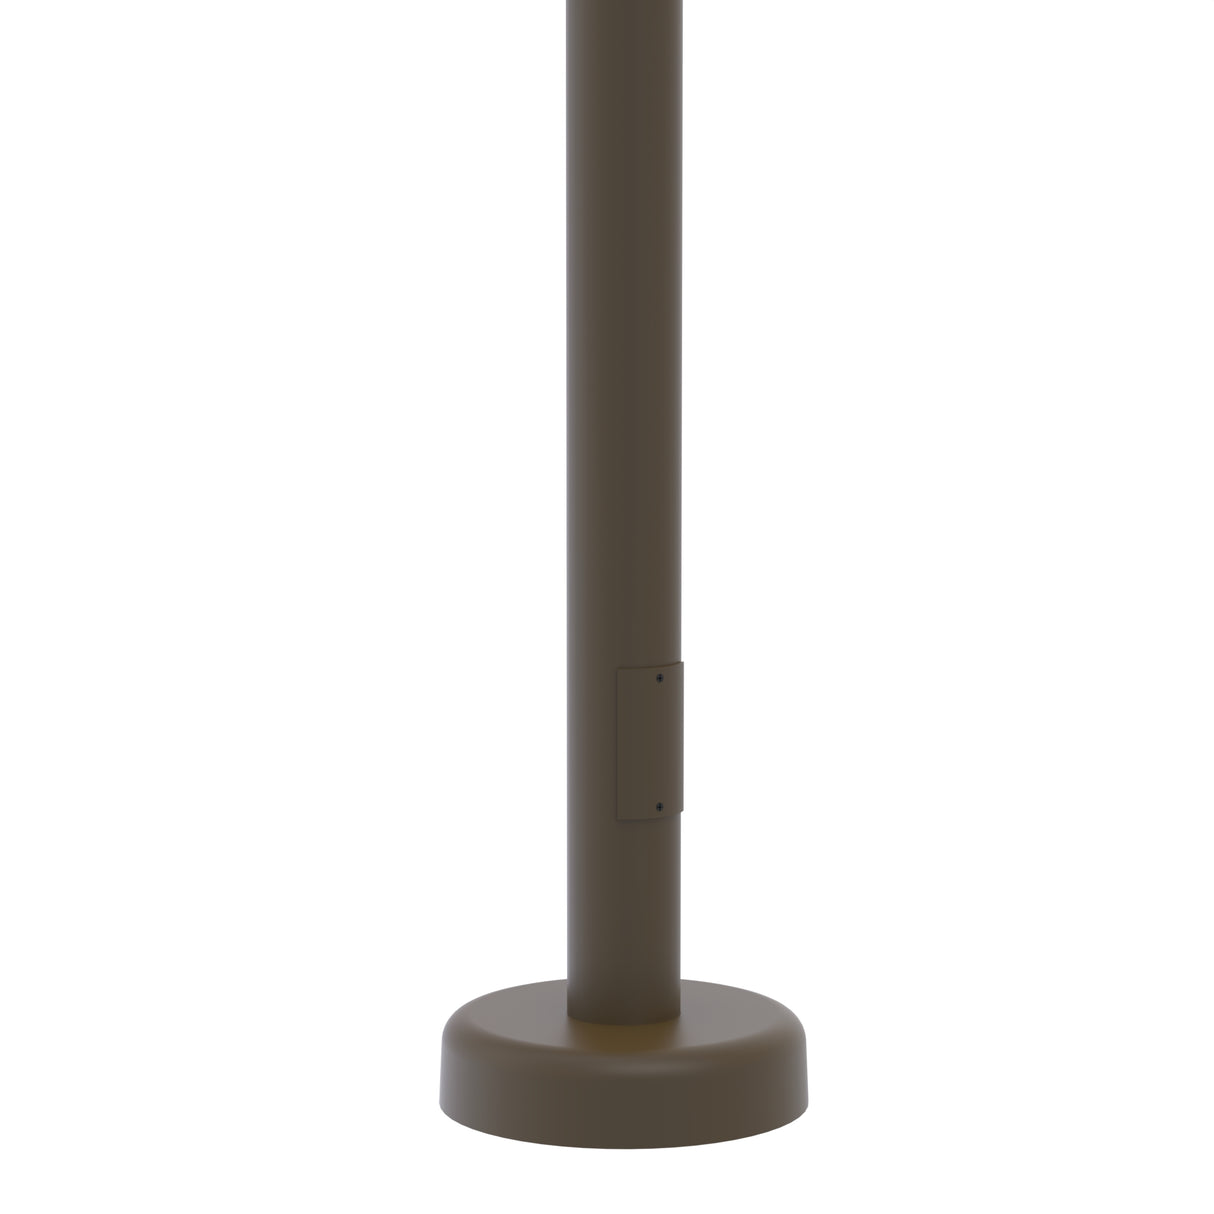 12' Tall x 4.0" Base OD x 3.0" Top OD x 0.125" Thick, Round Tapered Aluminum, Hinged Anchor Base Light Pole